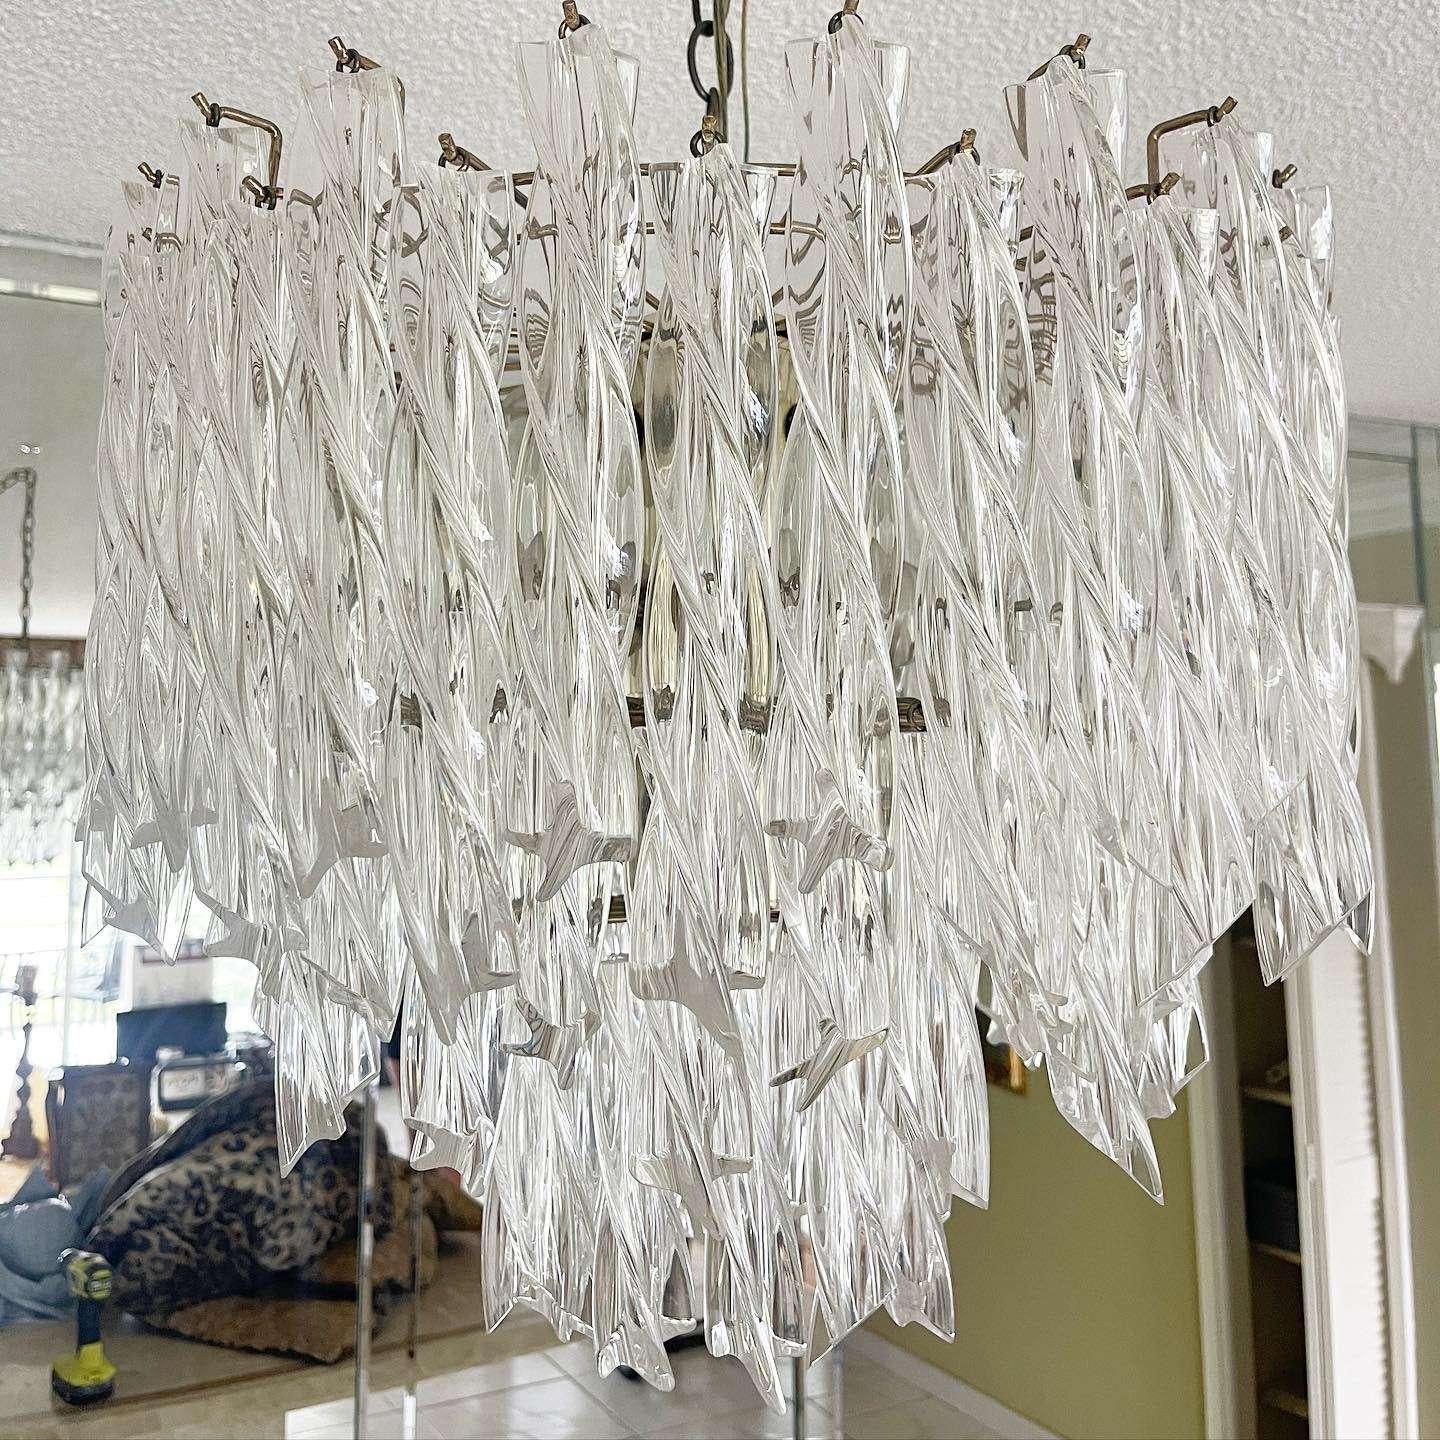 Art Deco Hanging Lucite Chandelier In Good Condition For Sale In Delray Beach, FL